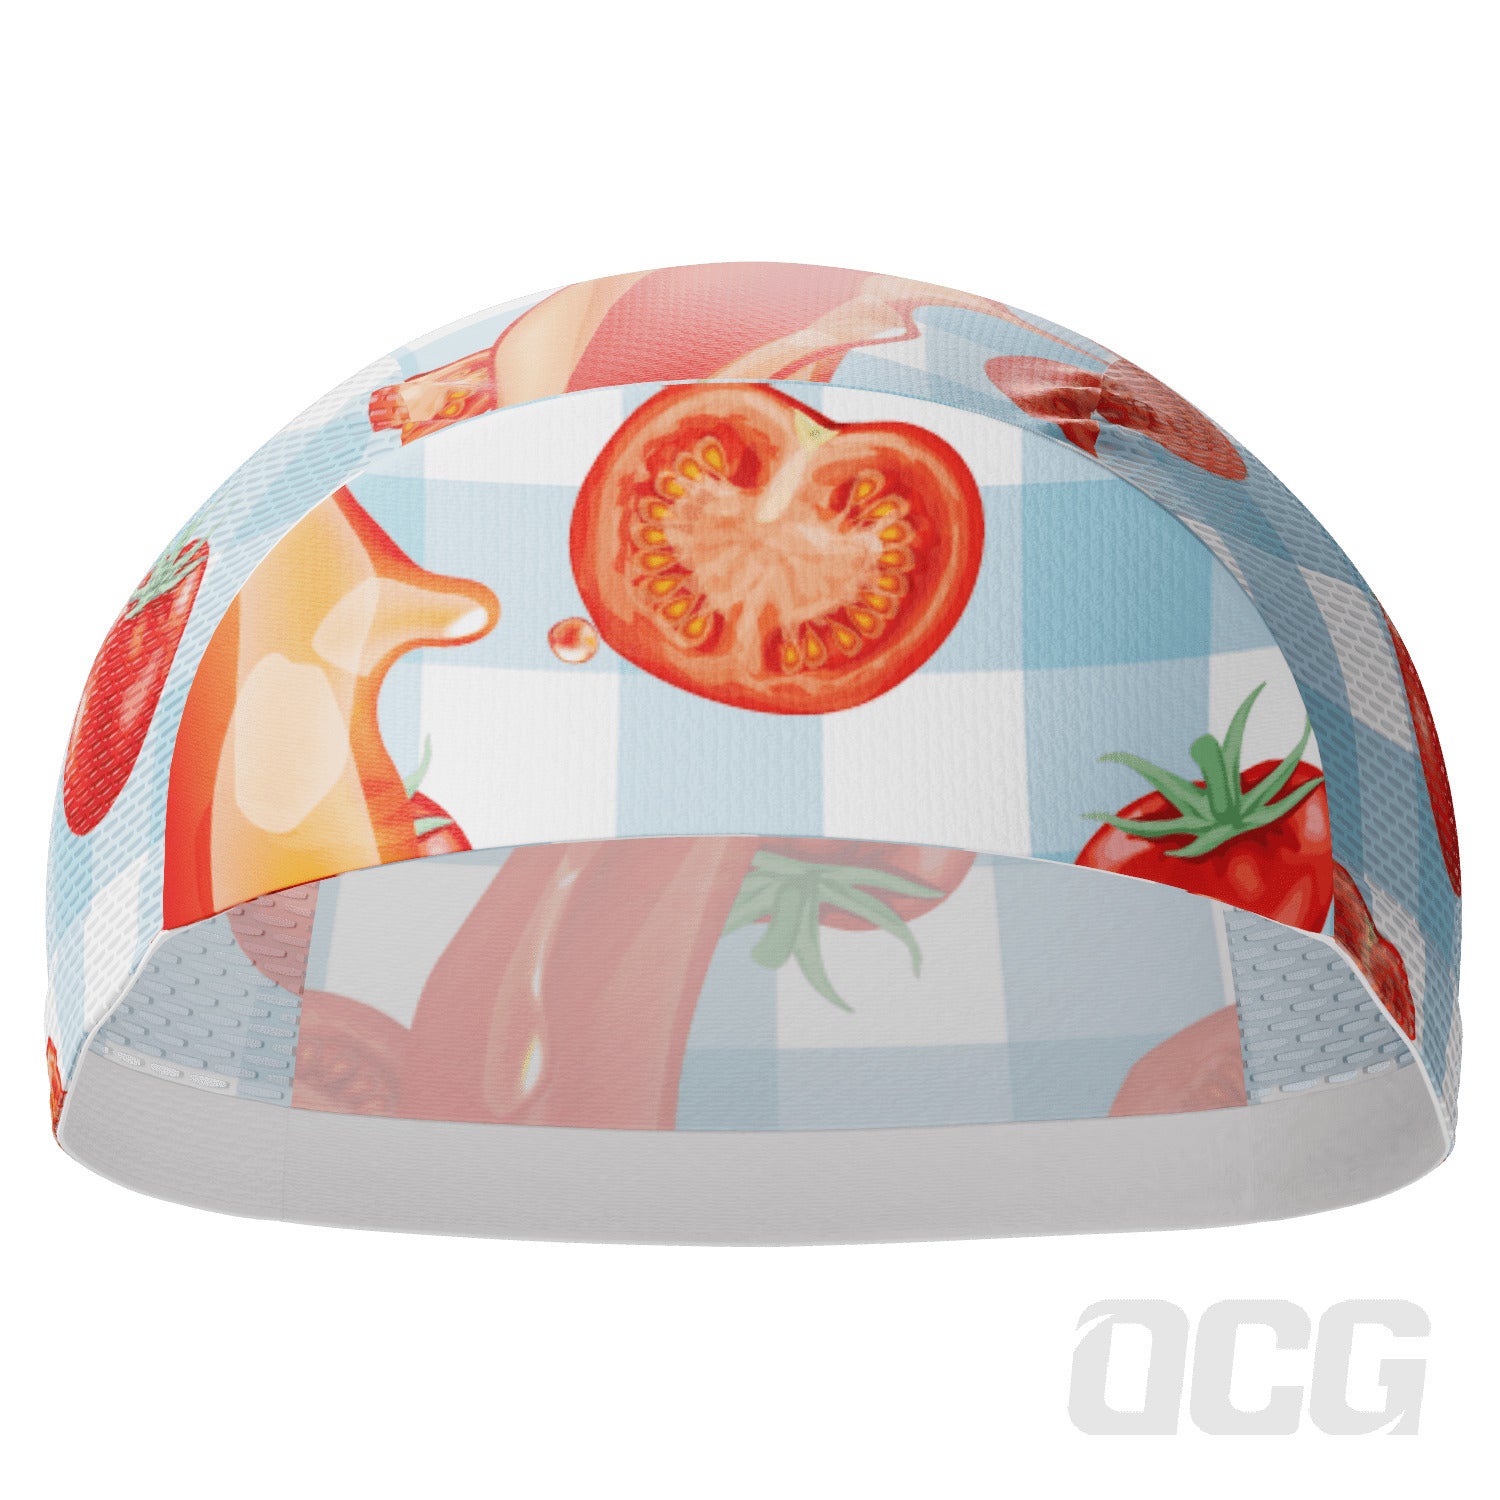 Men's Tomato Sauce Table Cloth Quick Dry Cycling Cap